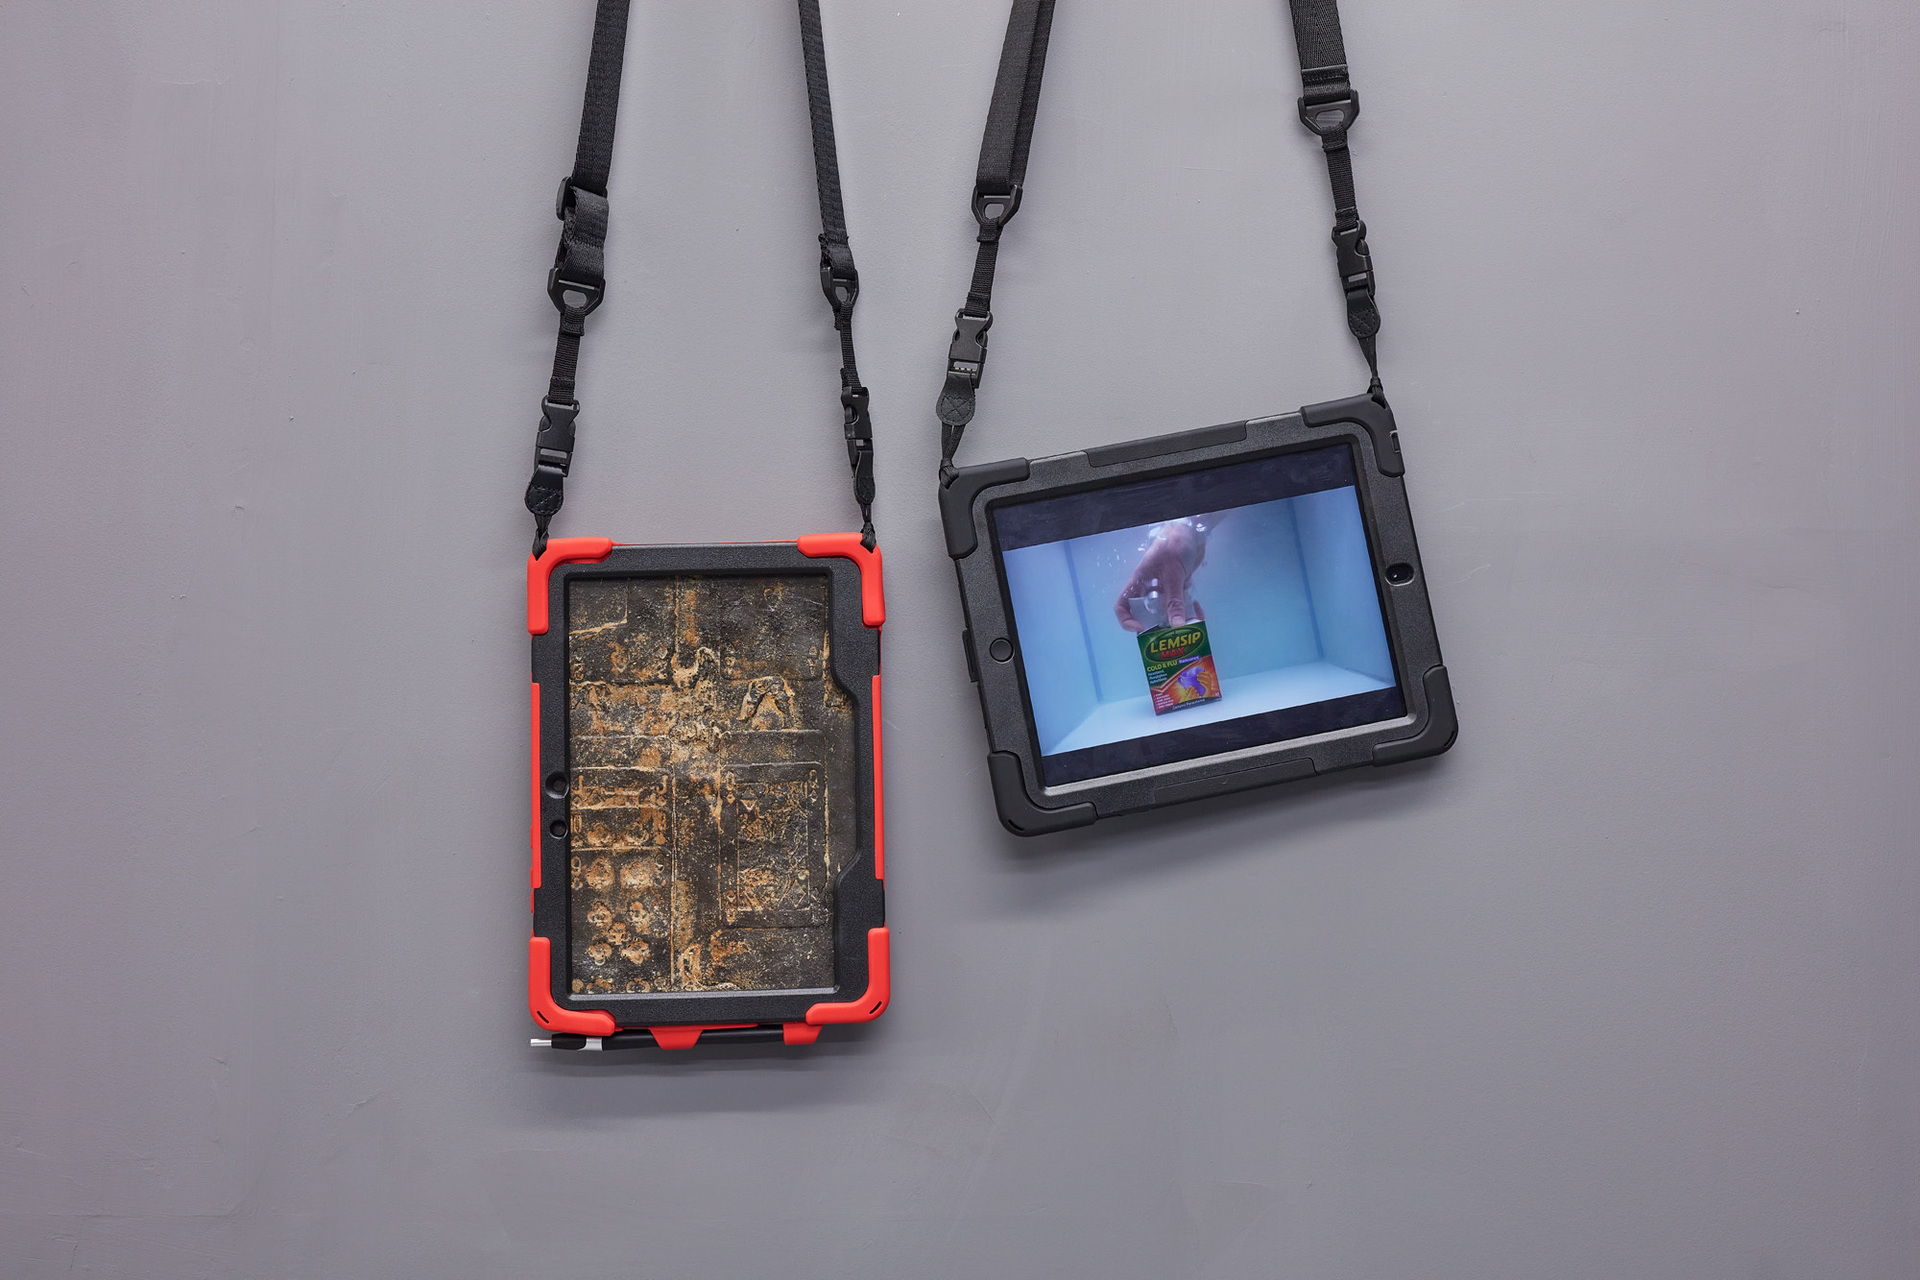 Alex Frost, Passive Aggression 5, 2021, Ipad covers and lanyards, resin cold cast tablet with iron filings (artificially rusted); Ipad with Wet Unboxing videos, 2017-2021